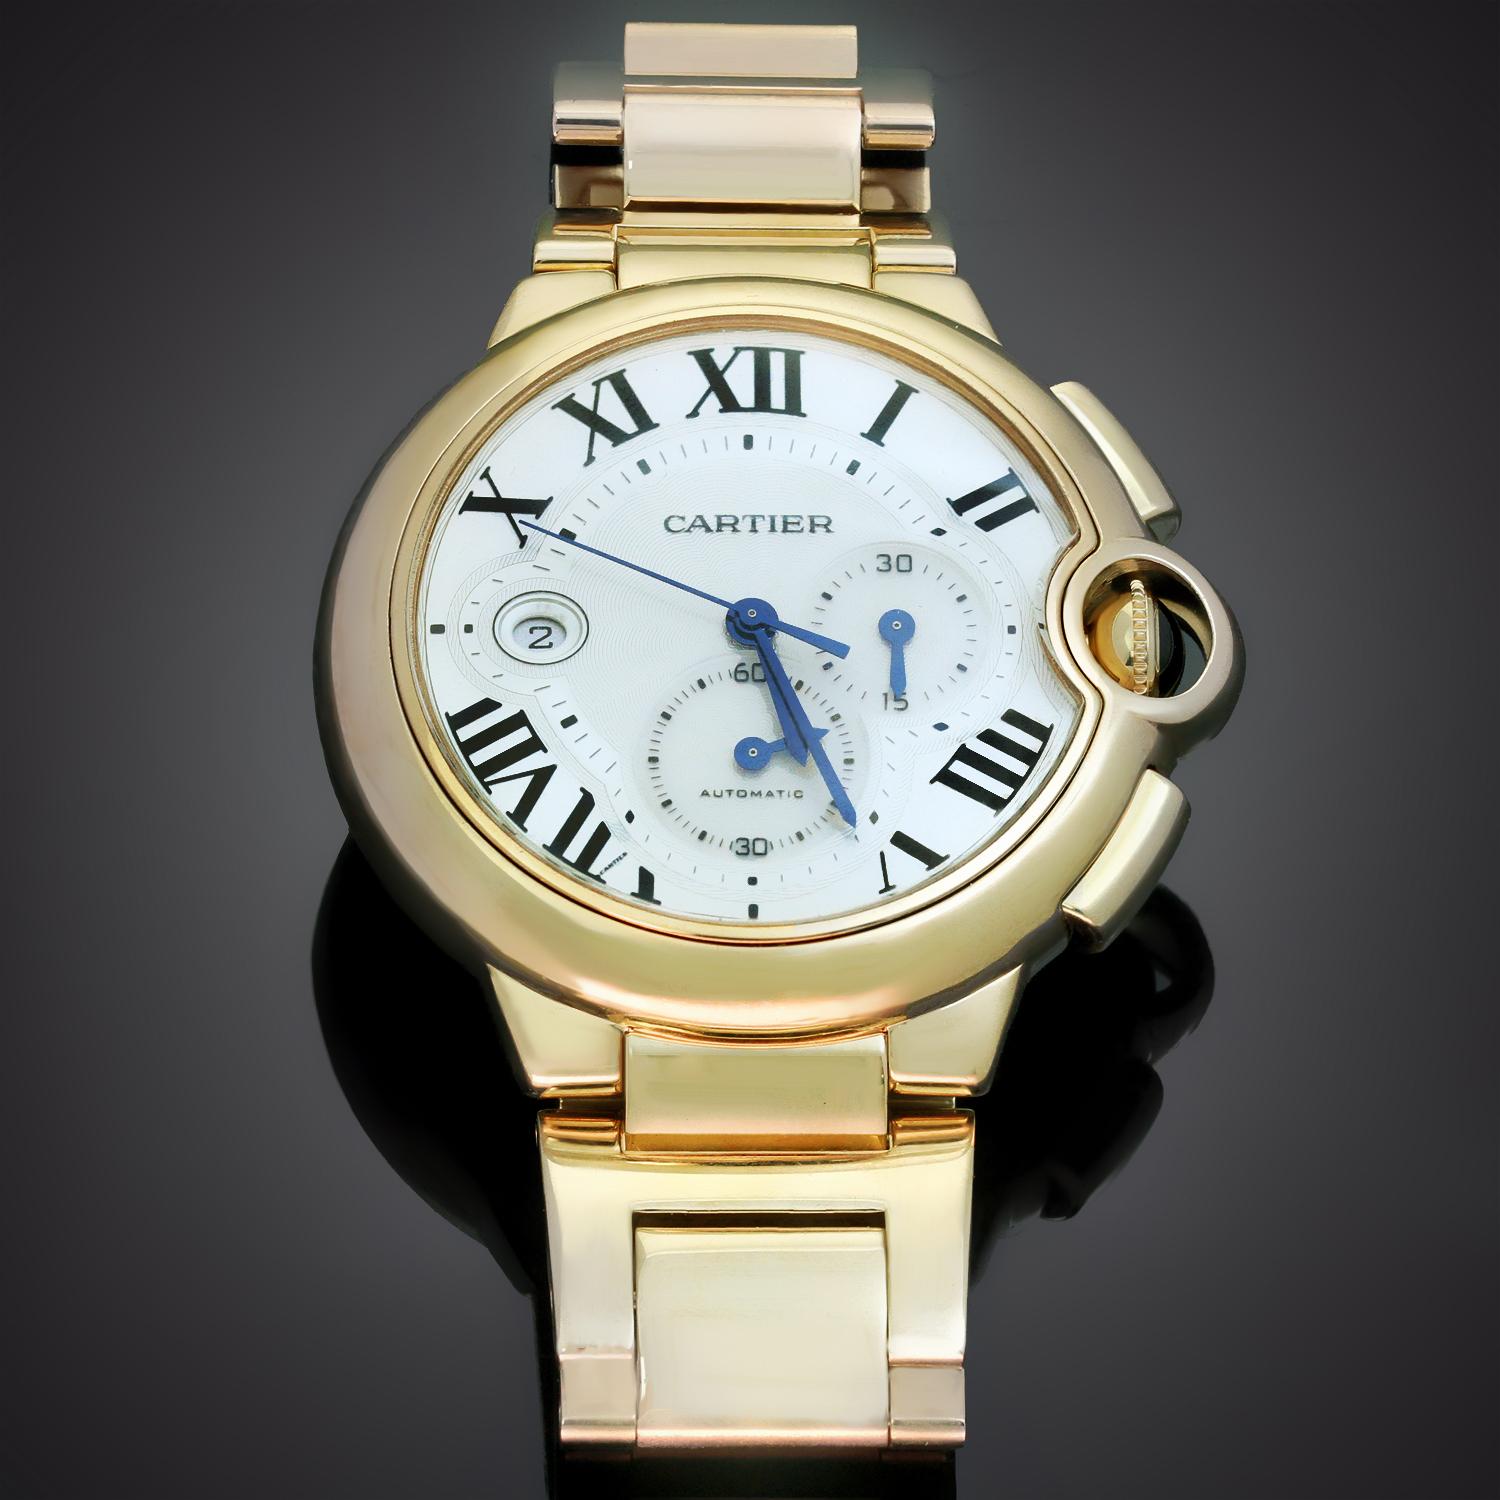 This magnificent Cartier wristwatch features an extra large 47mm 18k yellow gold case featuring a round 33mm dial with roman numerals, 9 o'clock date and 60 second/30 minute chronograph features, scratch resistant sapphire crystal, push & pull